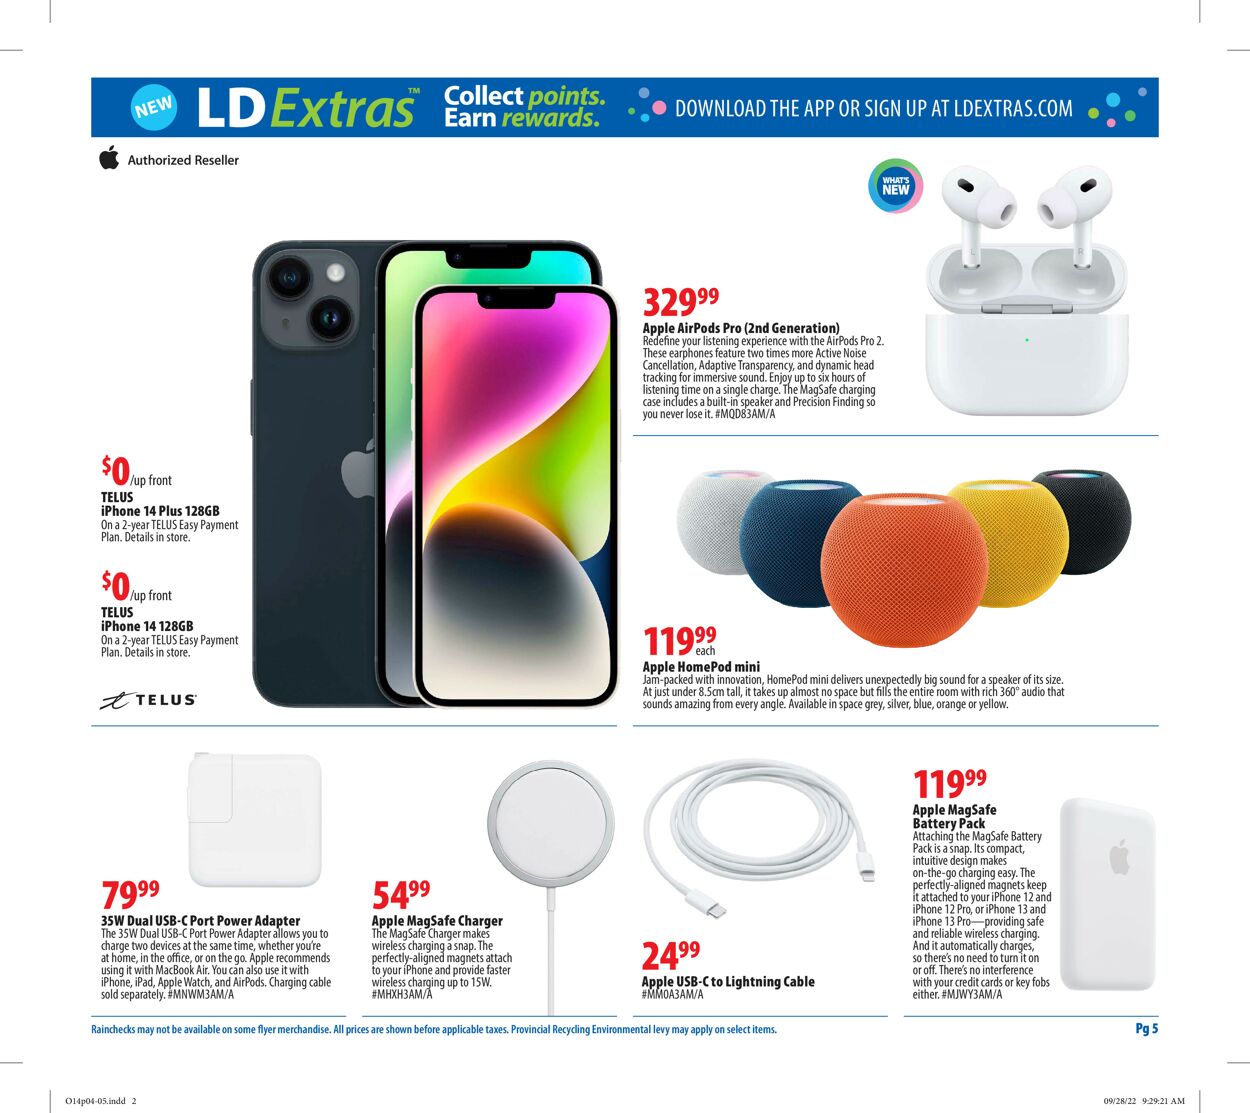 London Drugs Flyer from 10/14/2022